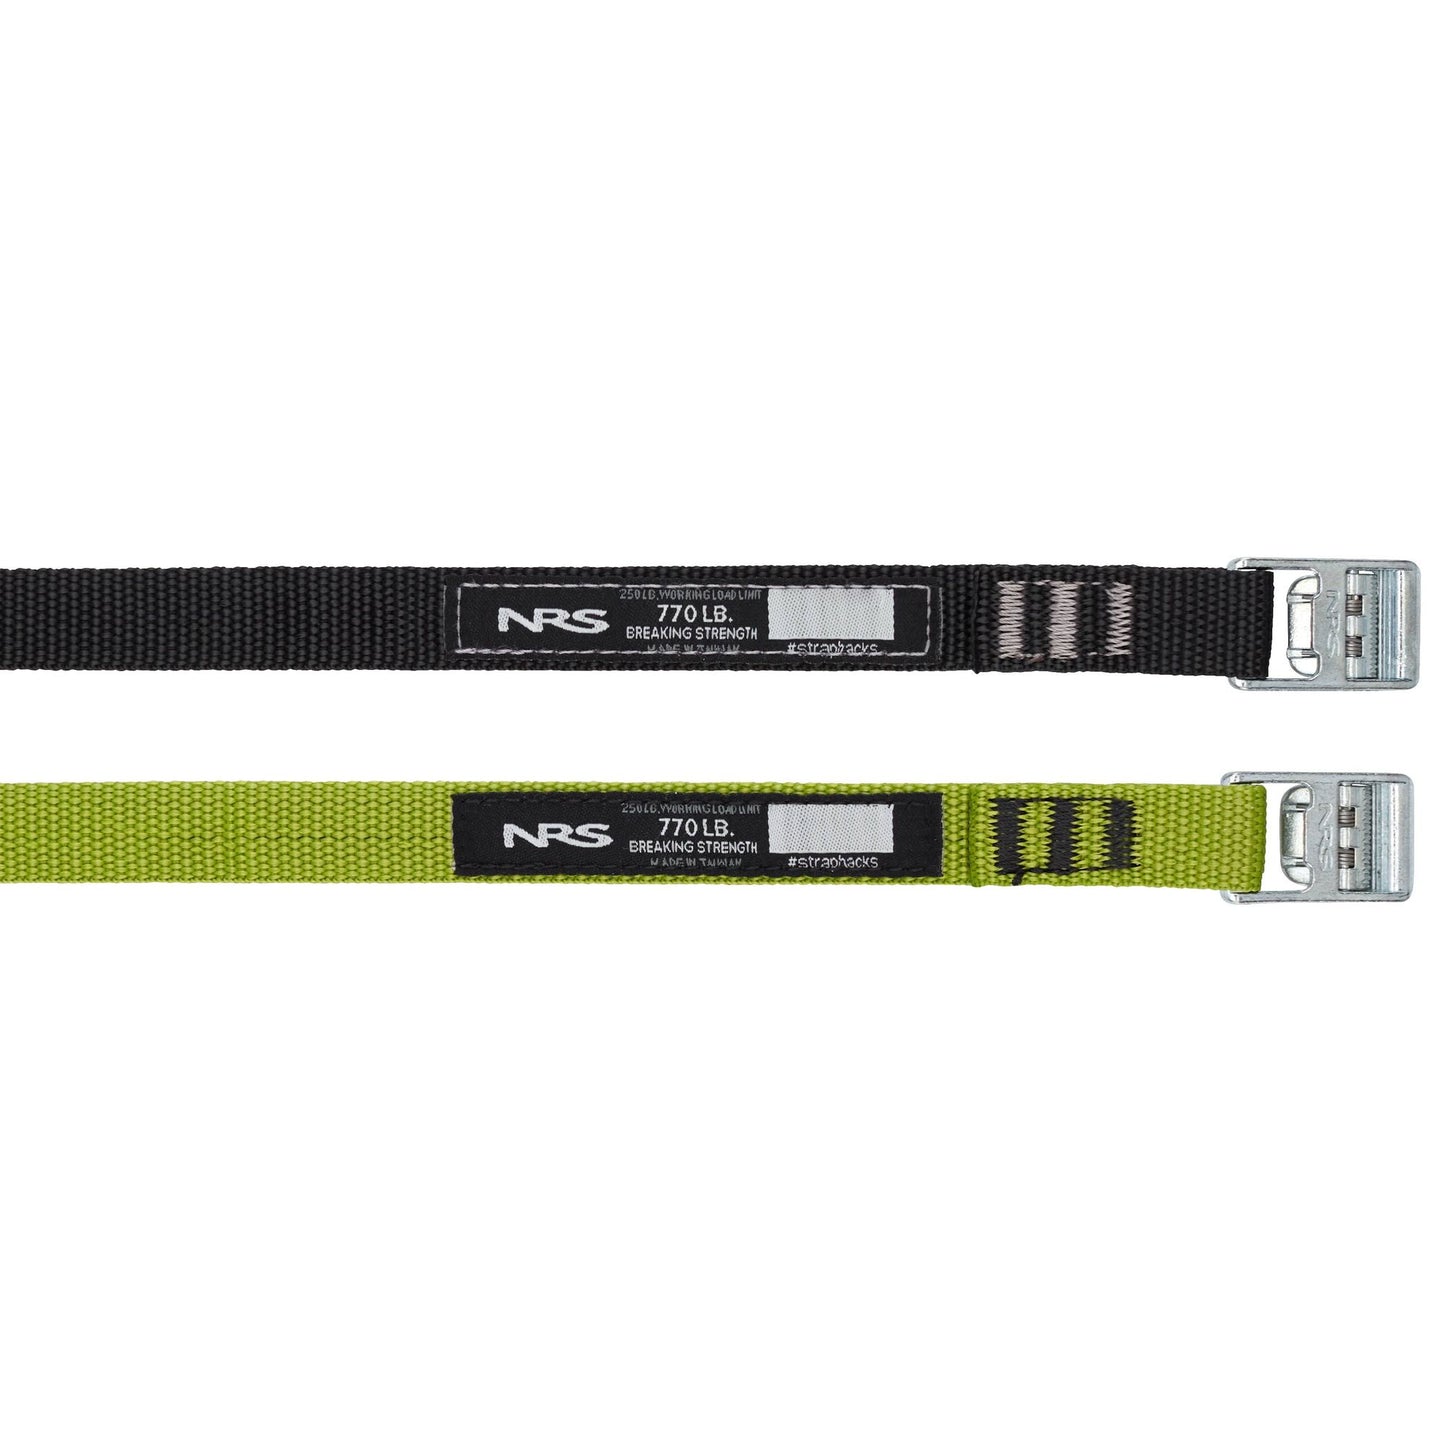 A pair of NRS Micro Straps 5/8" made with UV-protected polypropylene webbing on a white background.